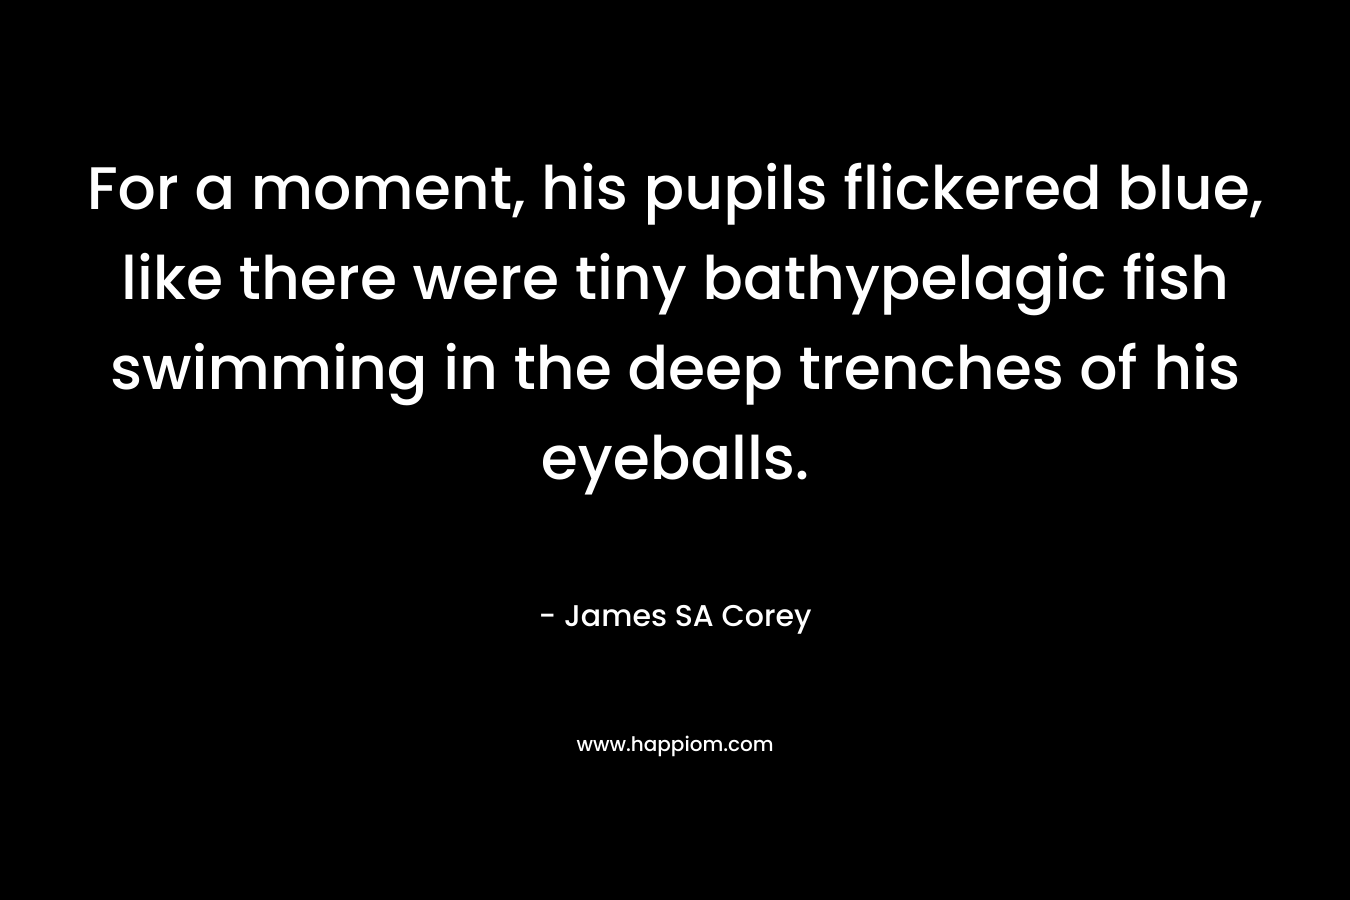 For a moment, his pupils flickered blue, like there were tiny bathypelagic fish swimming in the deep trenches of his eyeballs.